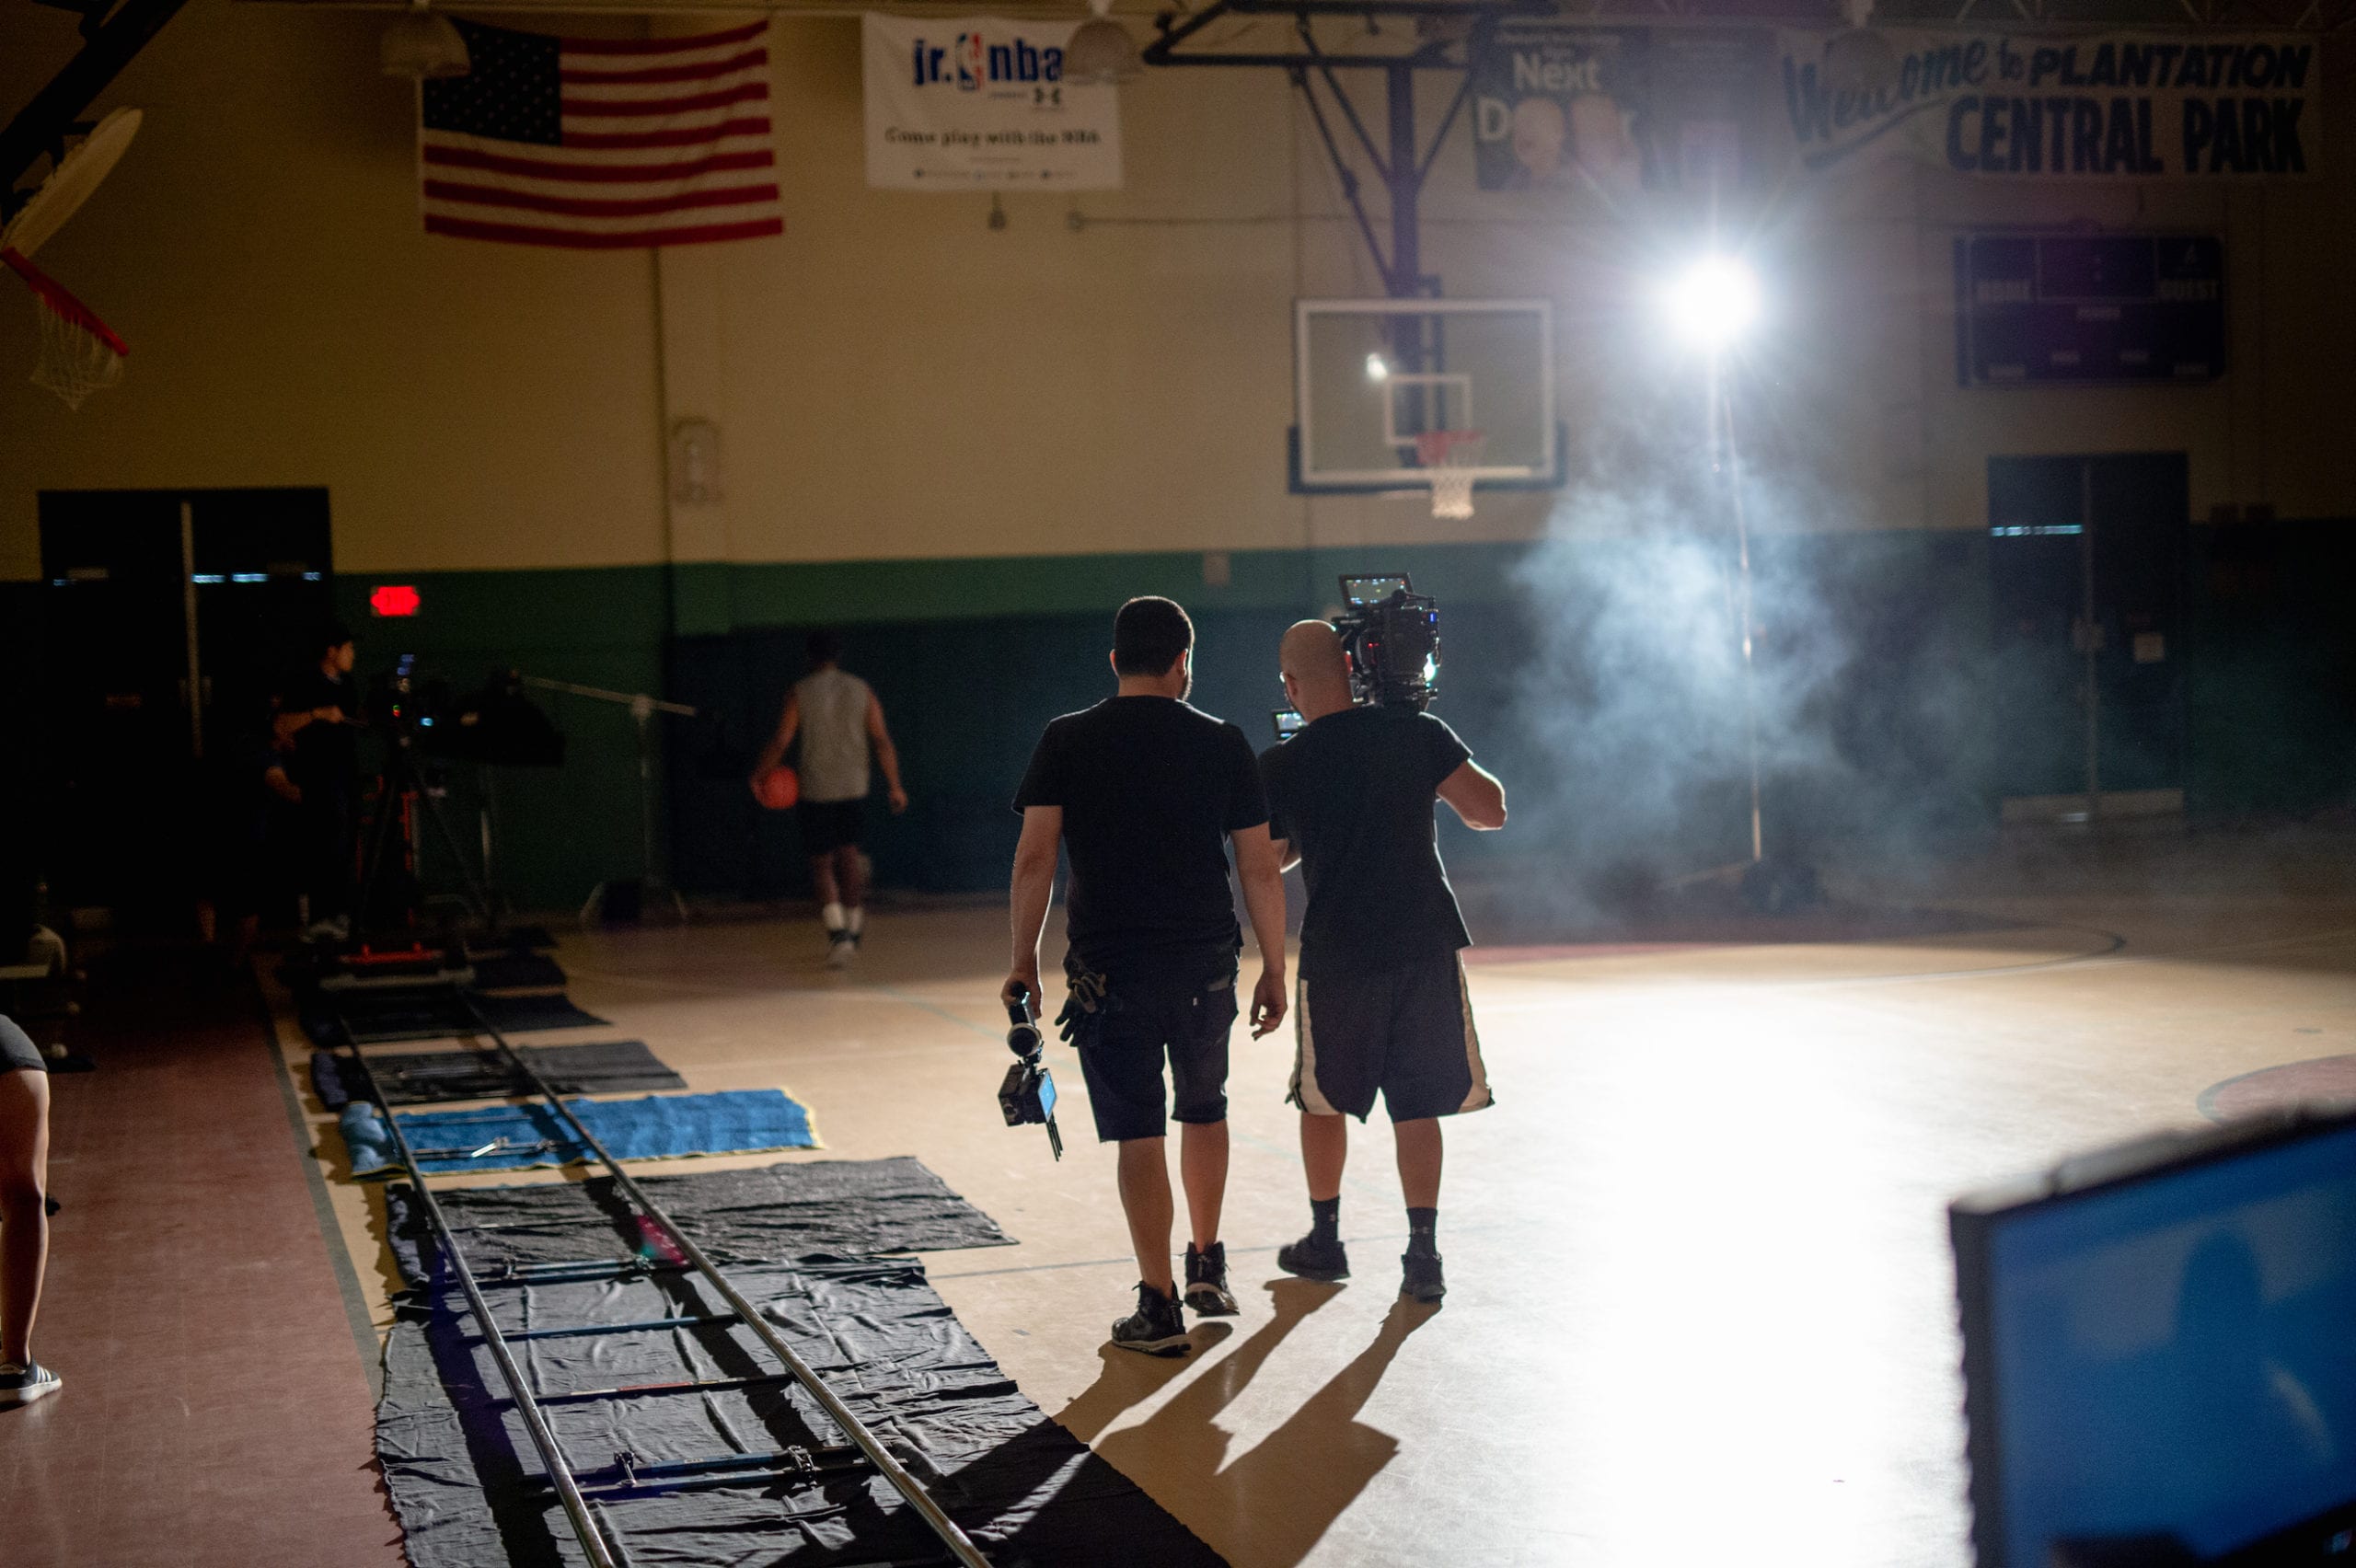 Nike scene being filmed on a basketball court in a gym with an African American man wearing a gray t shirt holding a ball walking away on the court surrounded by a film crew